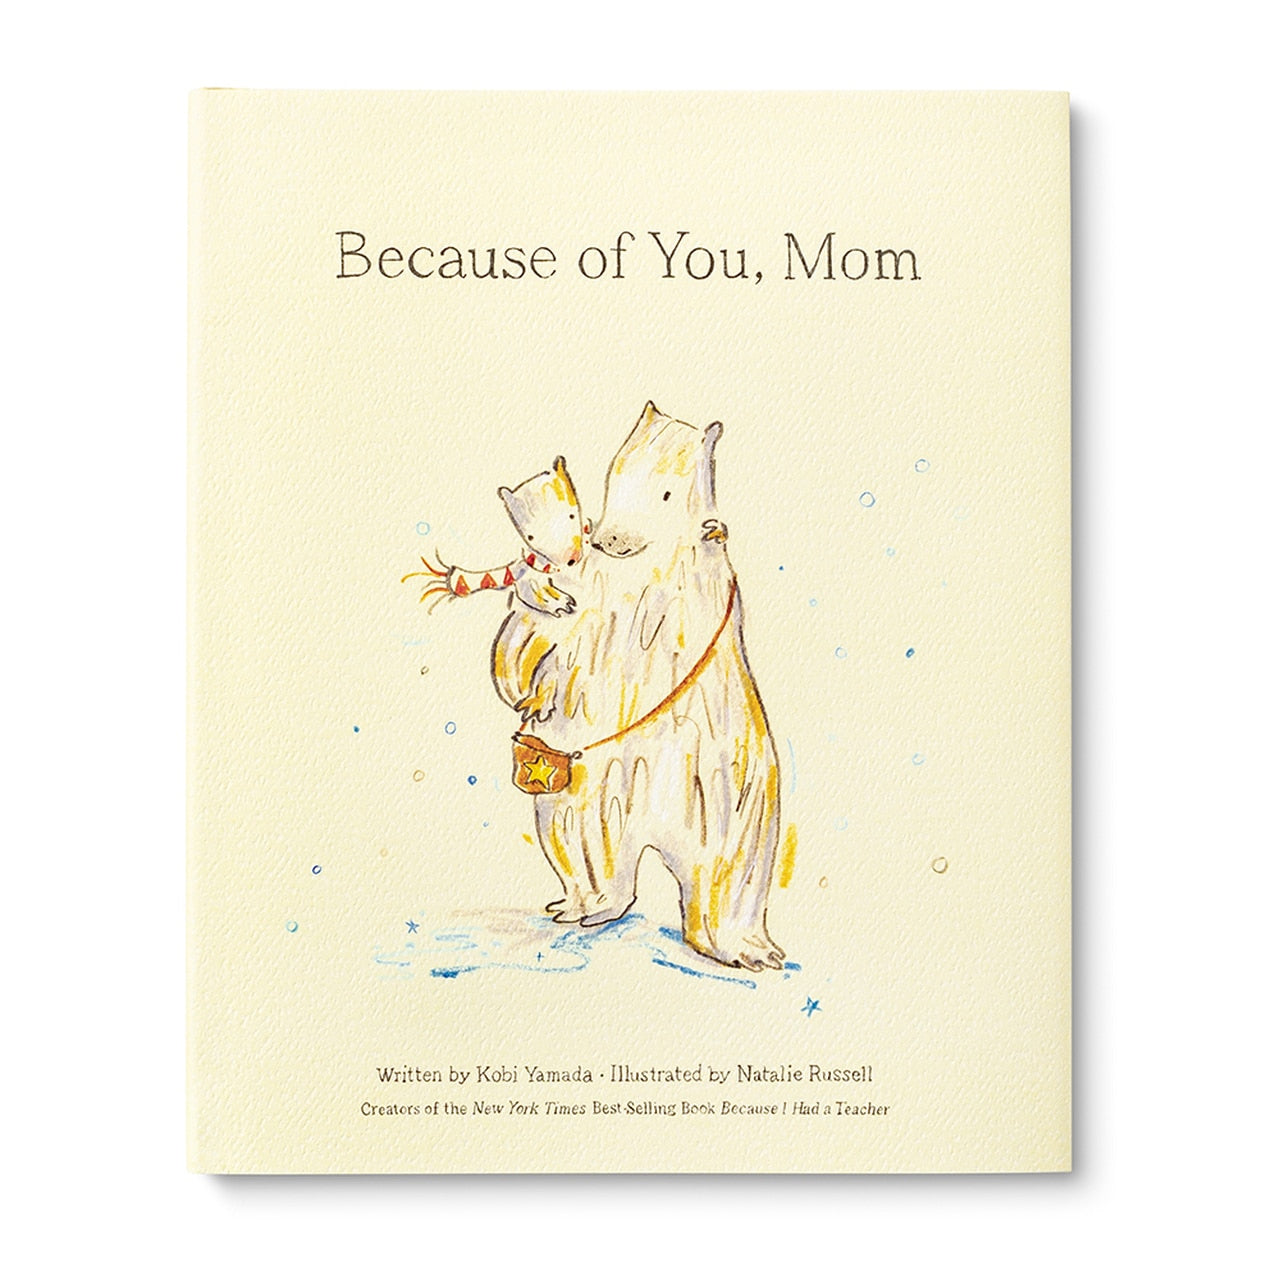 Because of You, Mom by Kobi Yamada and Natalie Russell